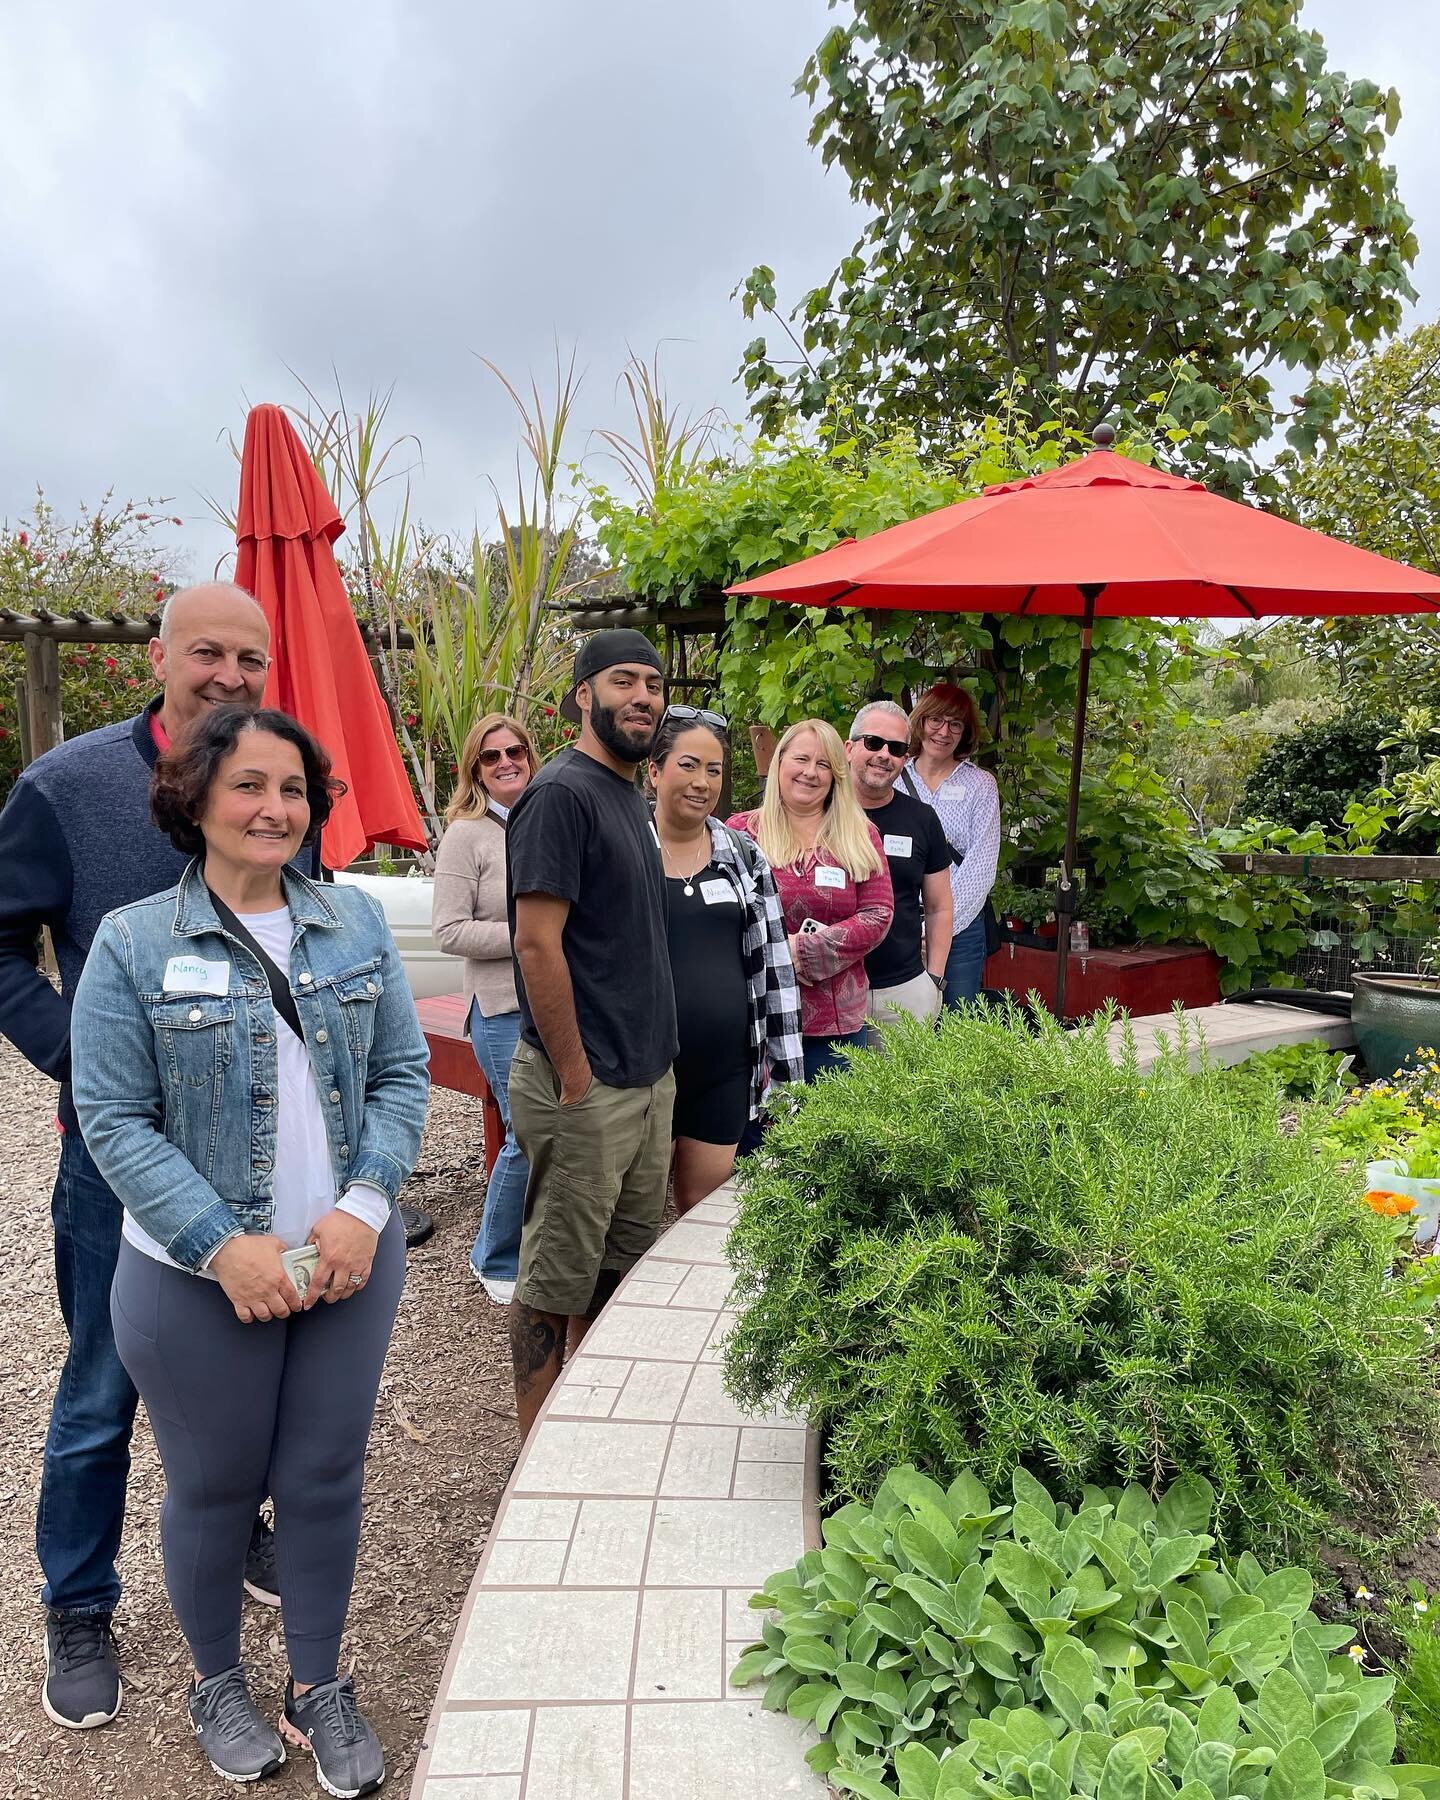 We had another wonderful workshop at the San Diego Botanic Garden! These monthly classes empower people to grow and preserve their own food, and donate their excess garden produce to help nourish neighbors in need. 
#GROWFOOD #ENDHUNGER #SAVETHEPLANE